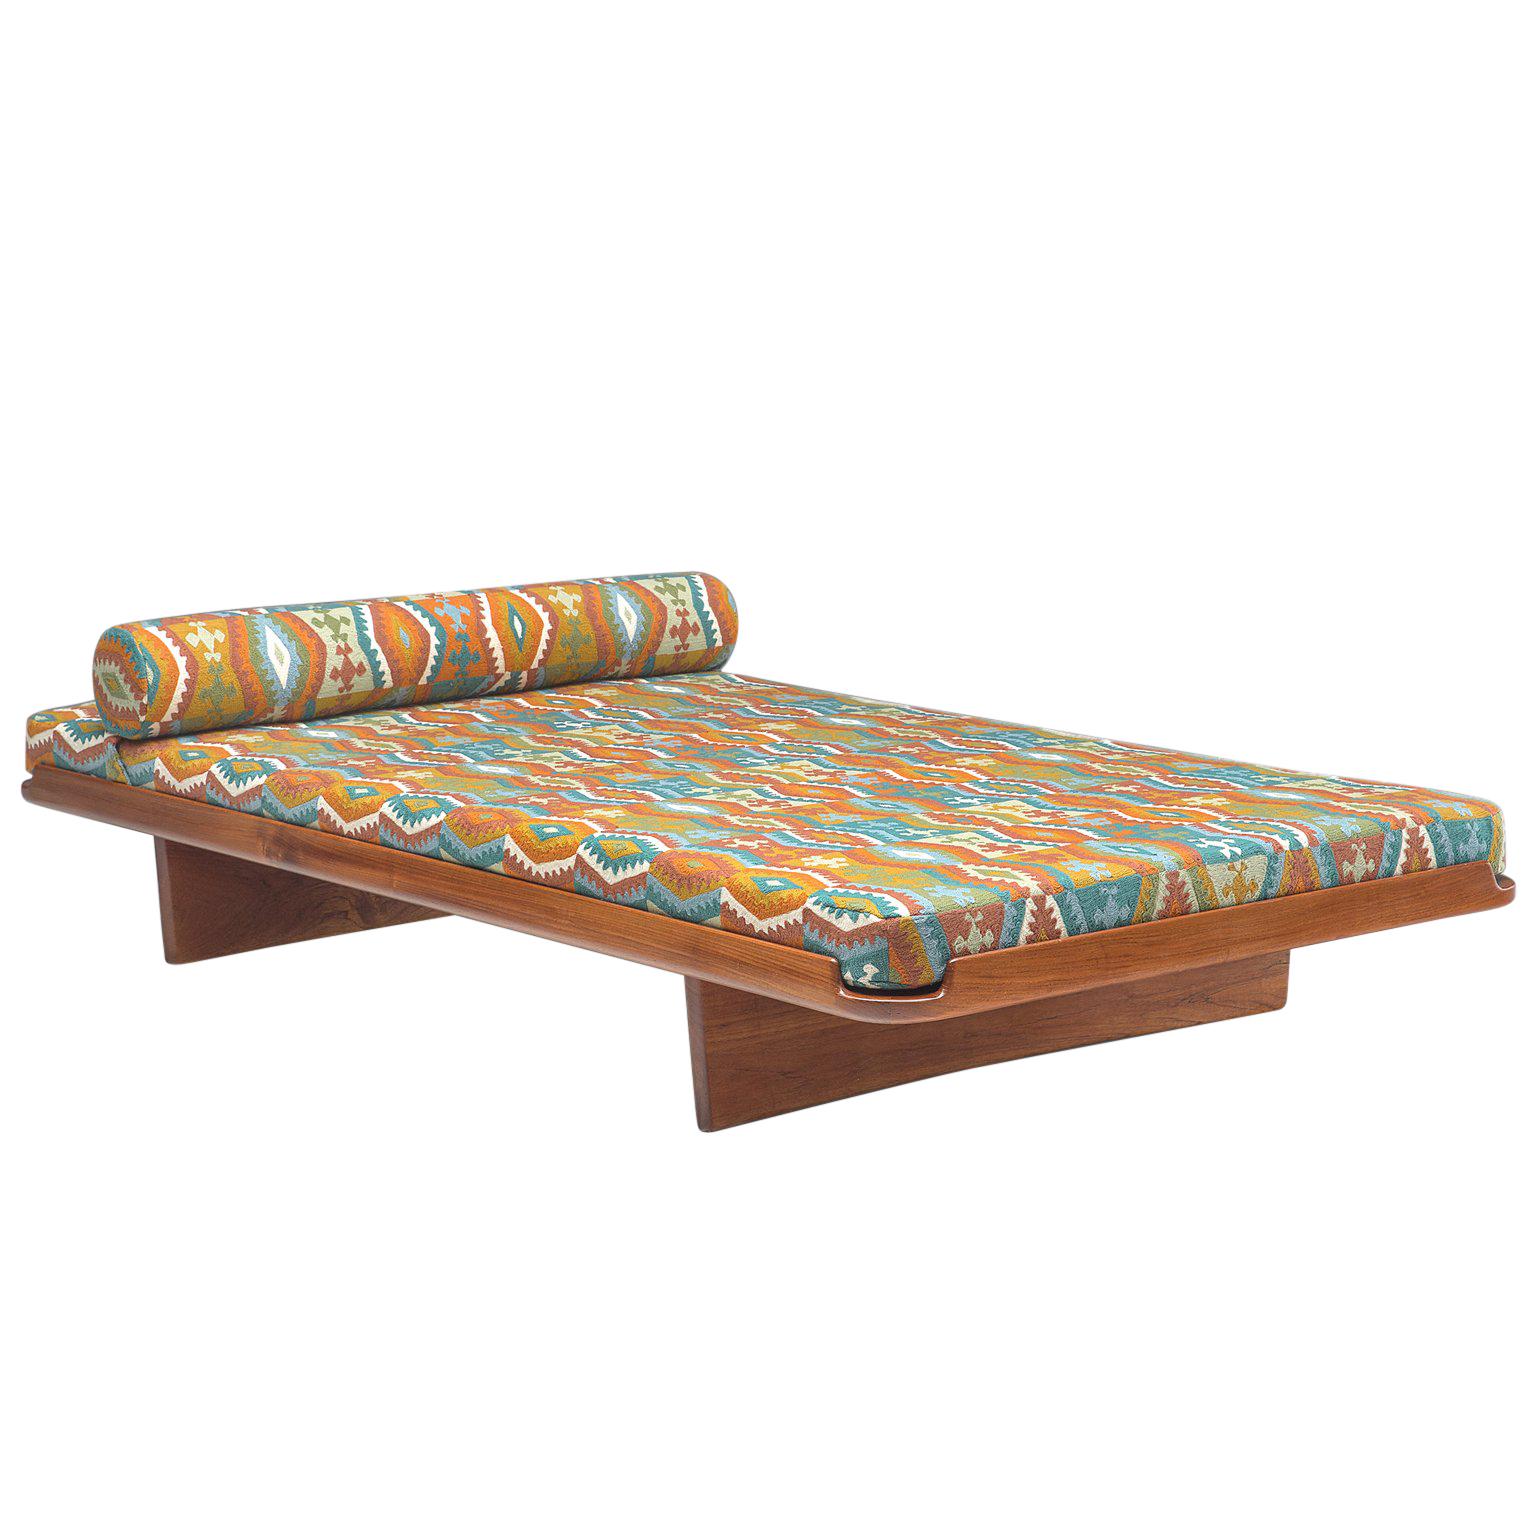 Grete Jalk Reupholstered Daybed in Colorful Pierre Frey Fabric